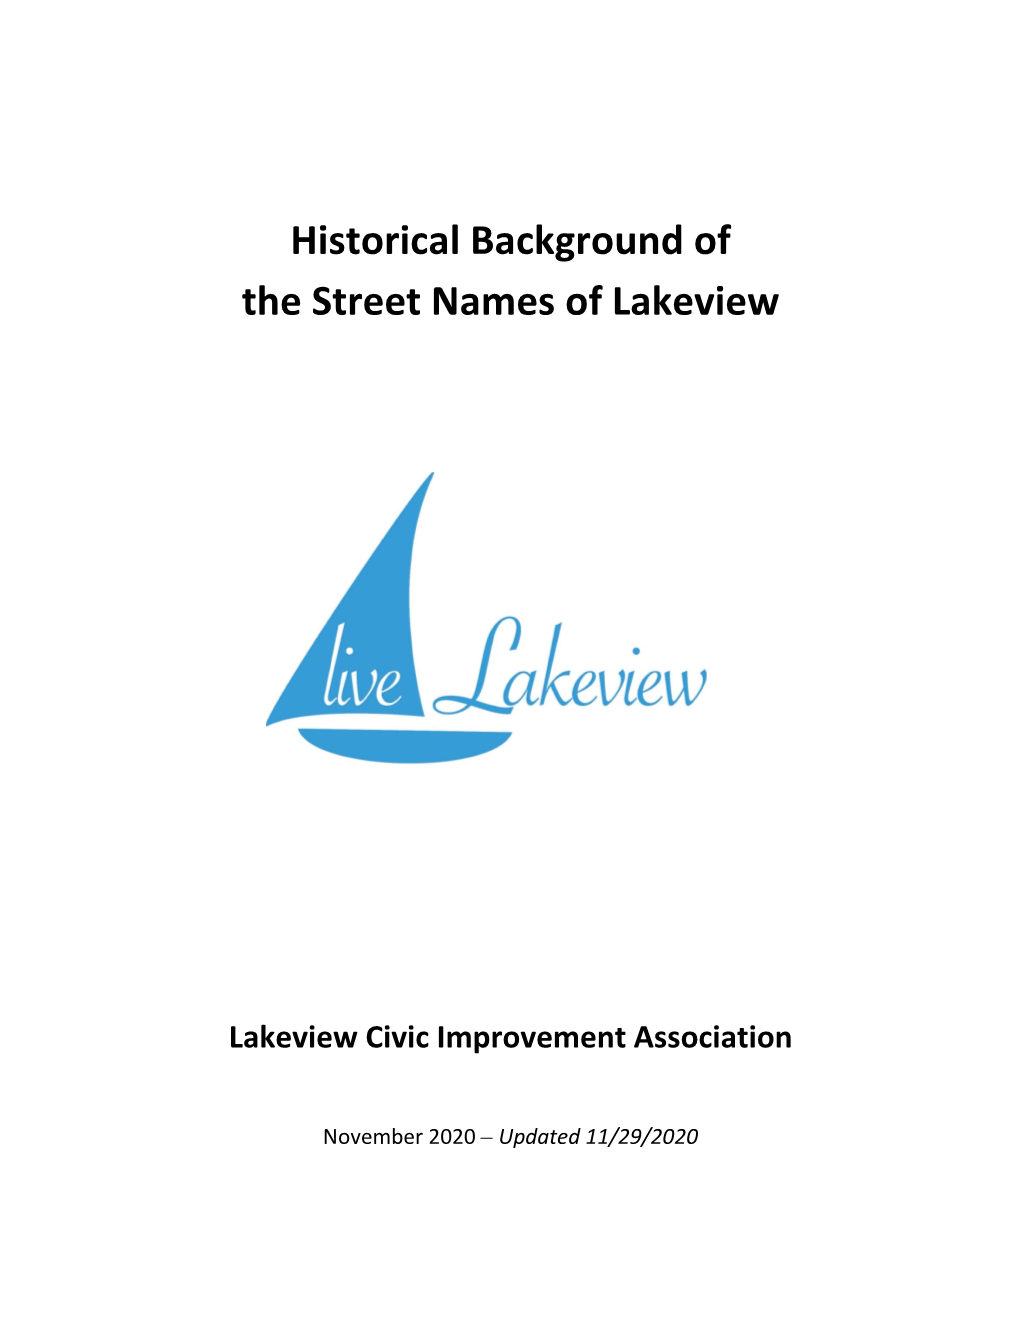 Historical Background of the Street Names of Lakeview